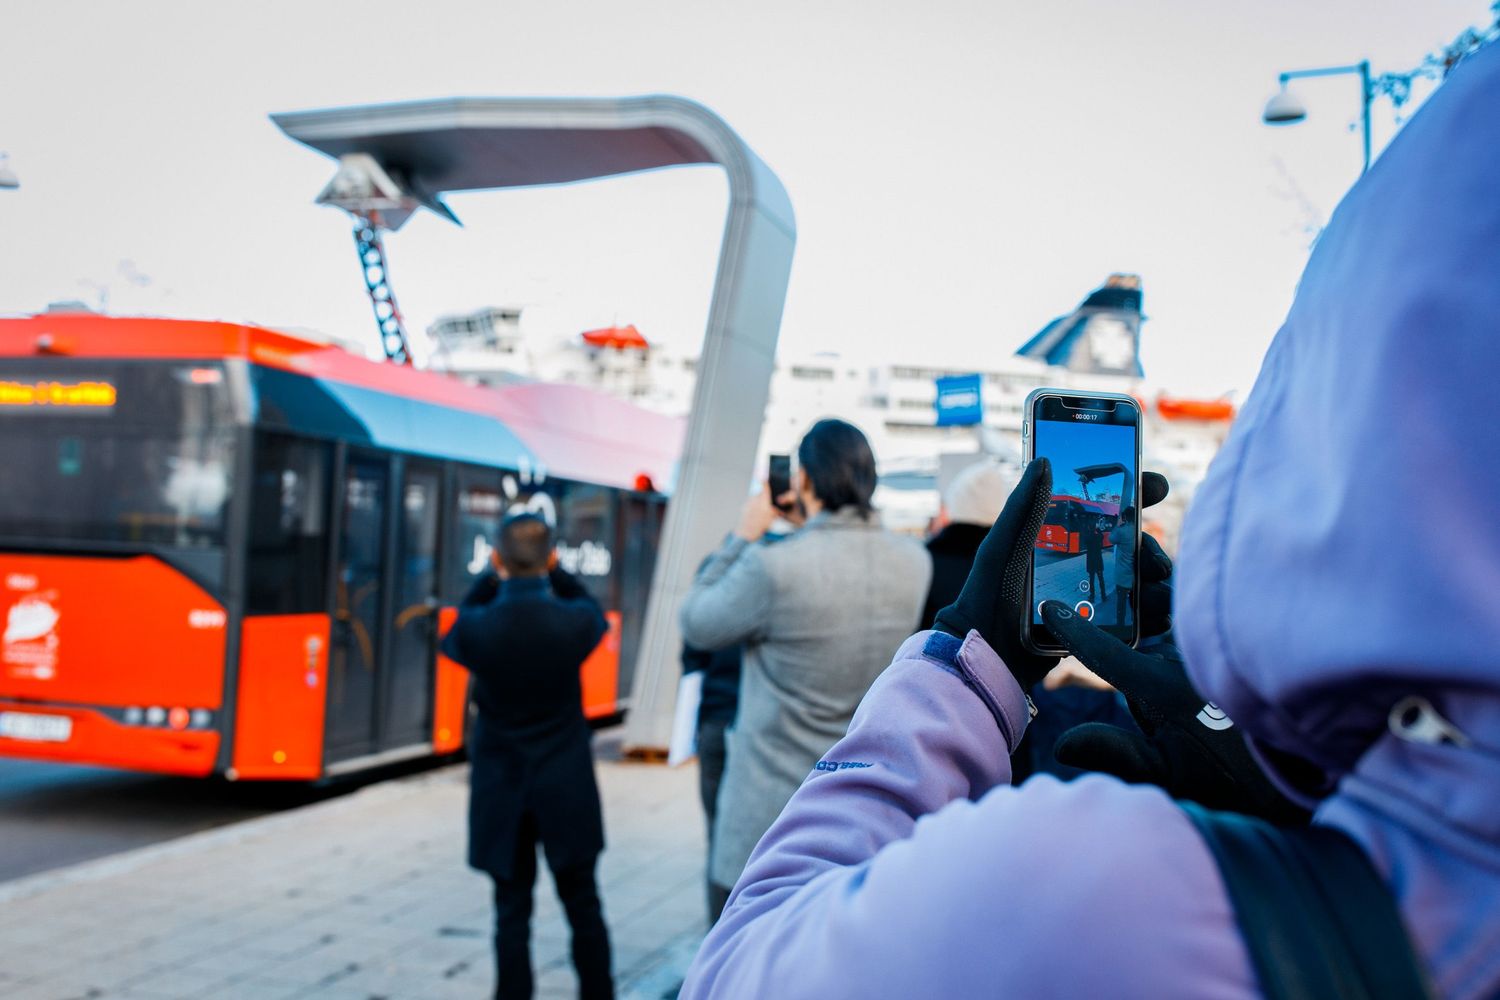 Oslo's climate strategy: electric buses